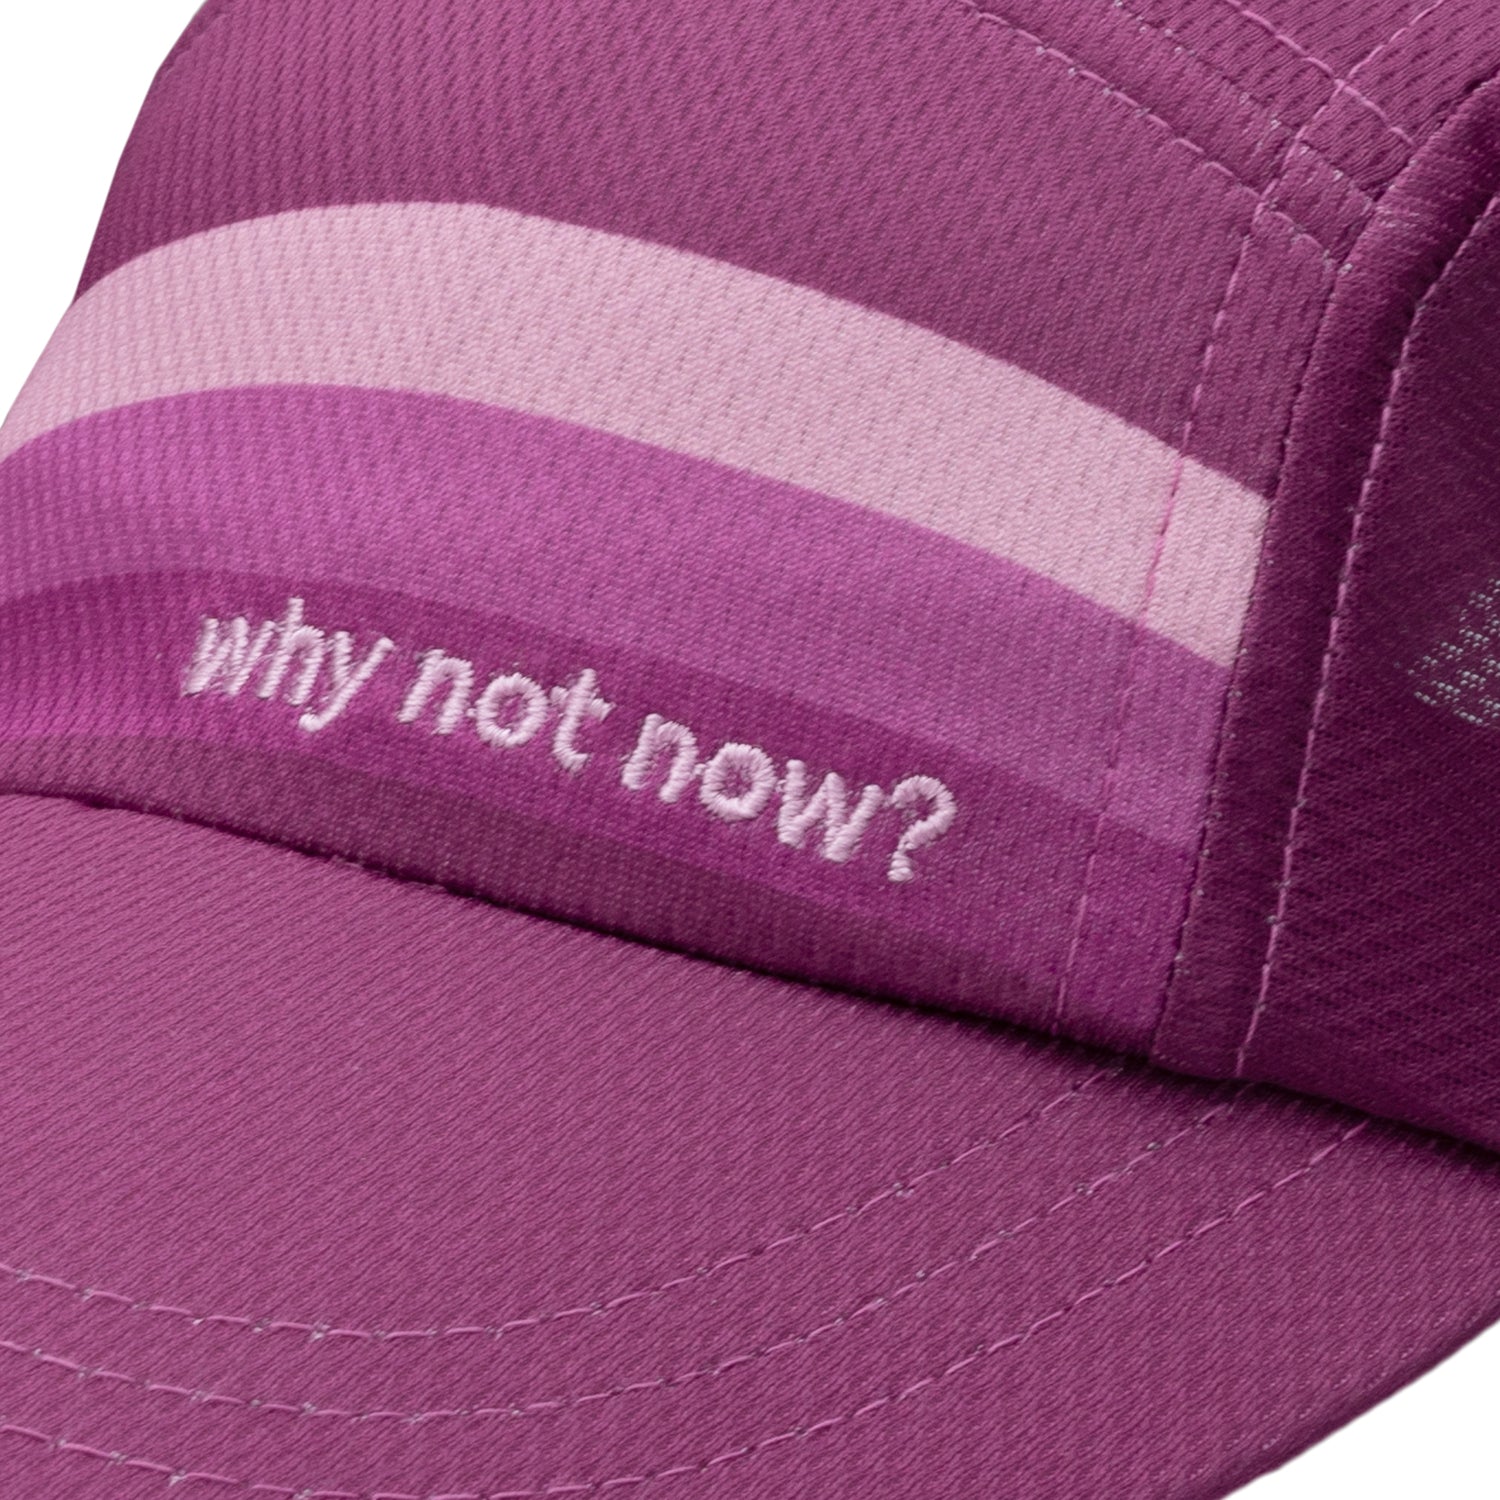 Why Not Now? Race Hat